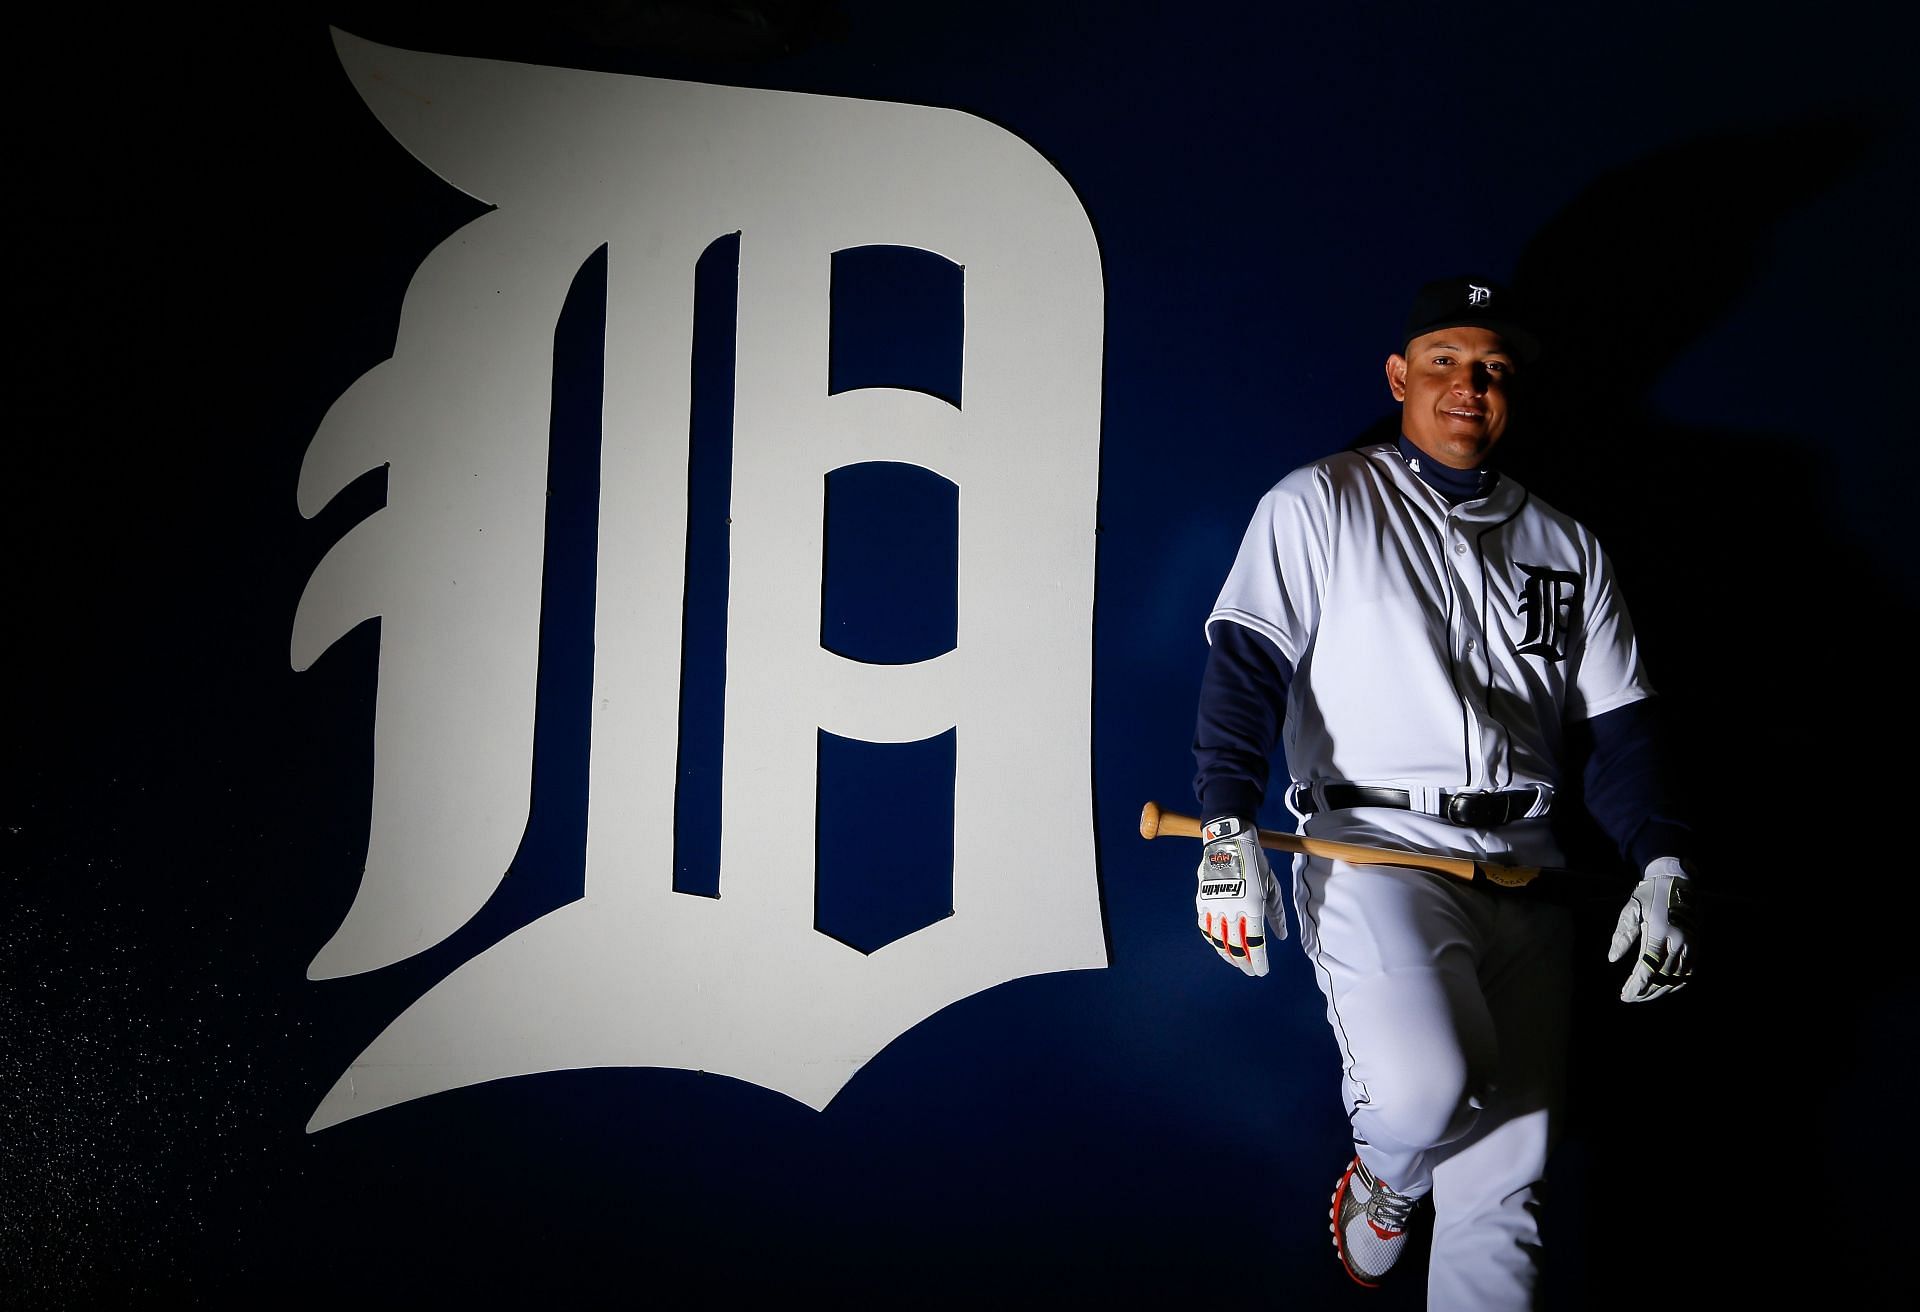 Thank You Miguel Cabrera We Will Never Forget Watching You Play